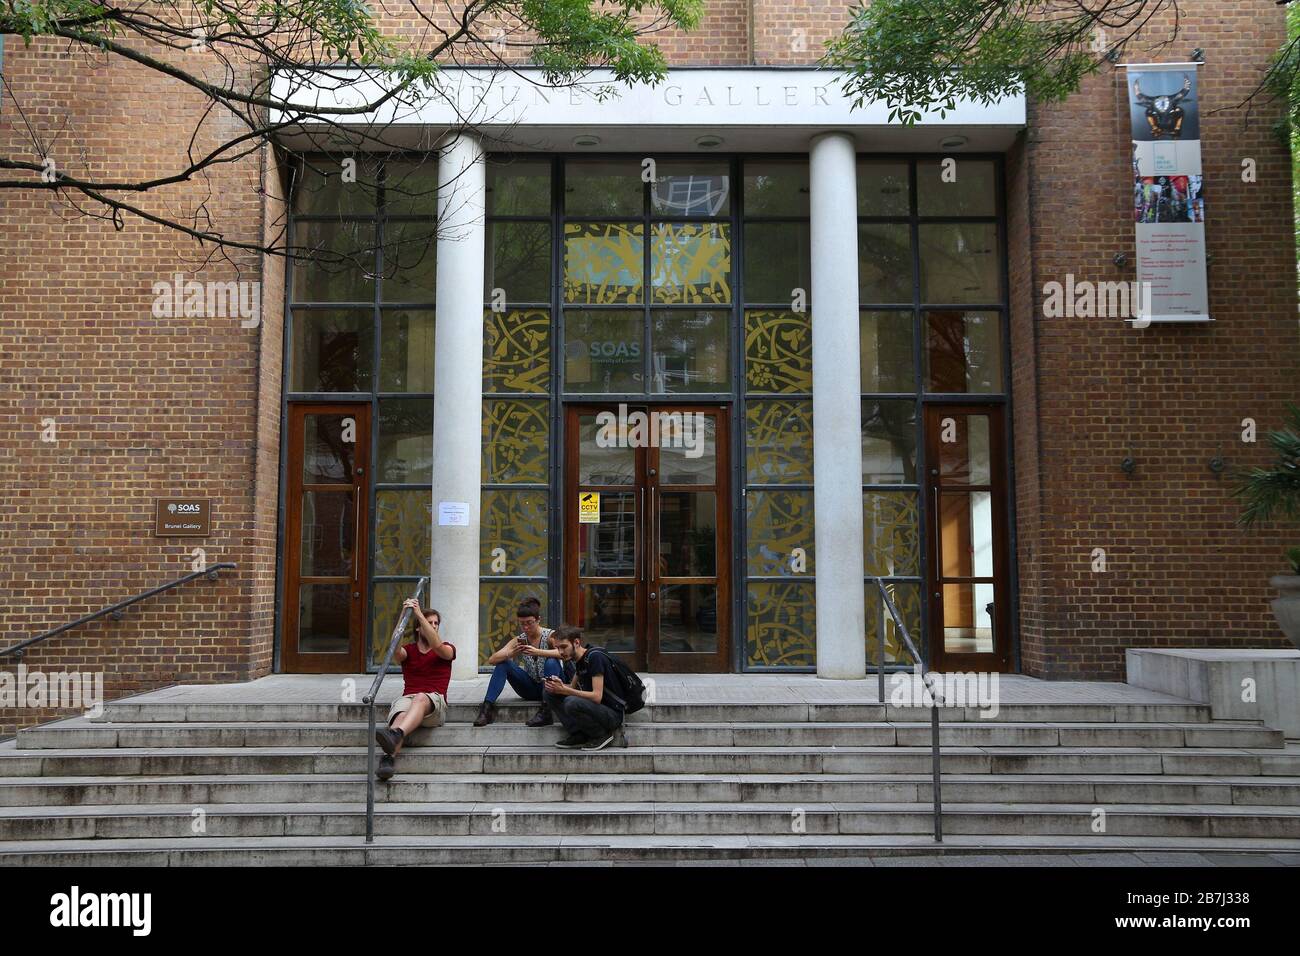 LONDON, UK - JULY 6, 2016: People visit SOAS Building at University of London, UK. The School of Oriental and African Studies (SOAS) is among top univ Stock Photo